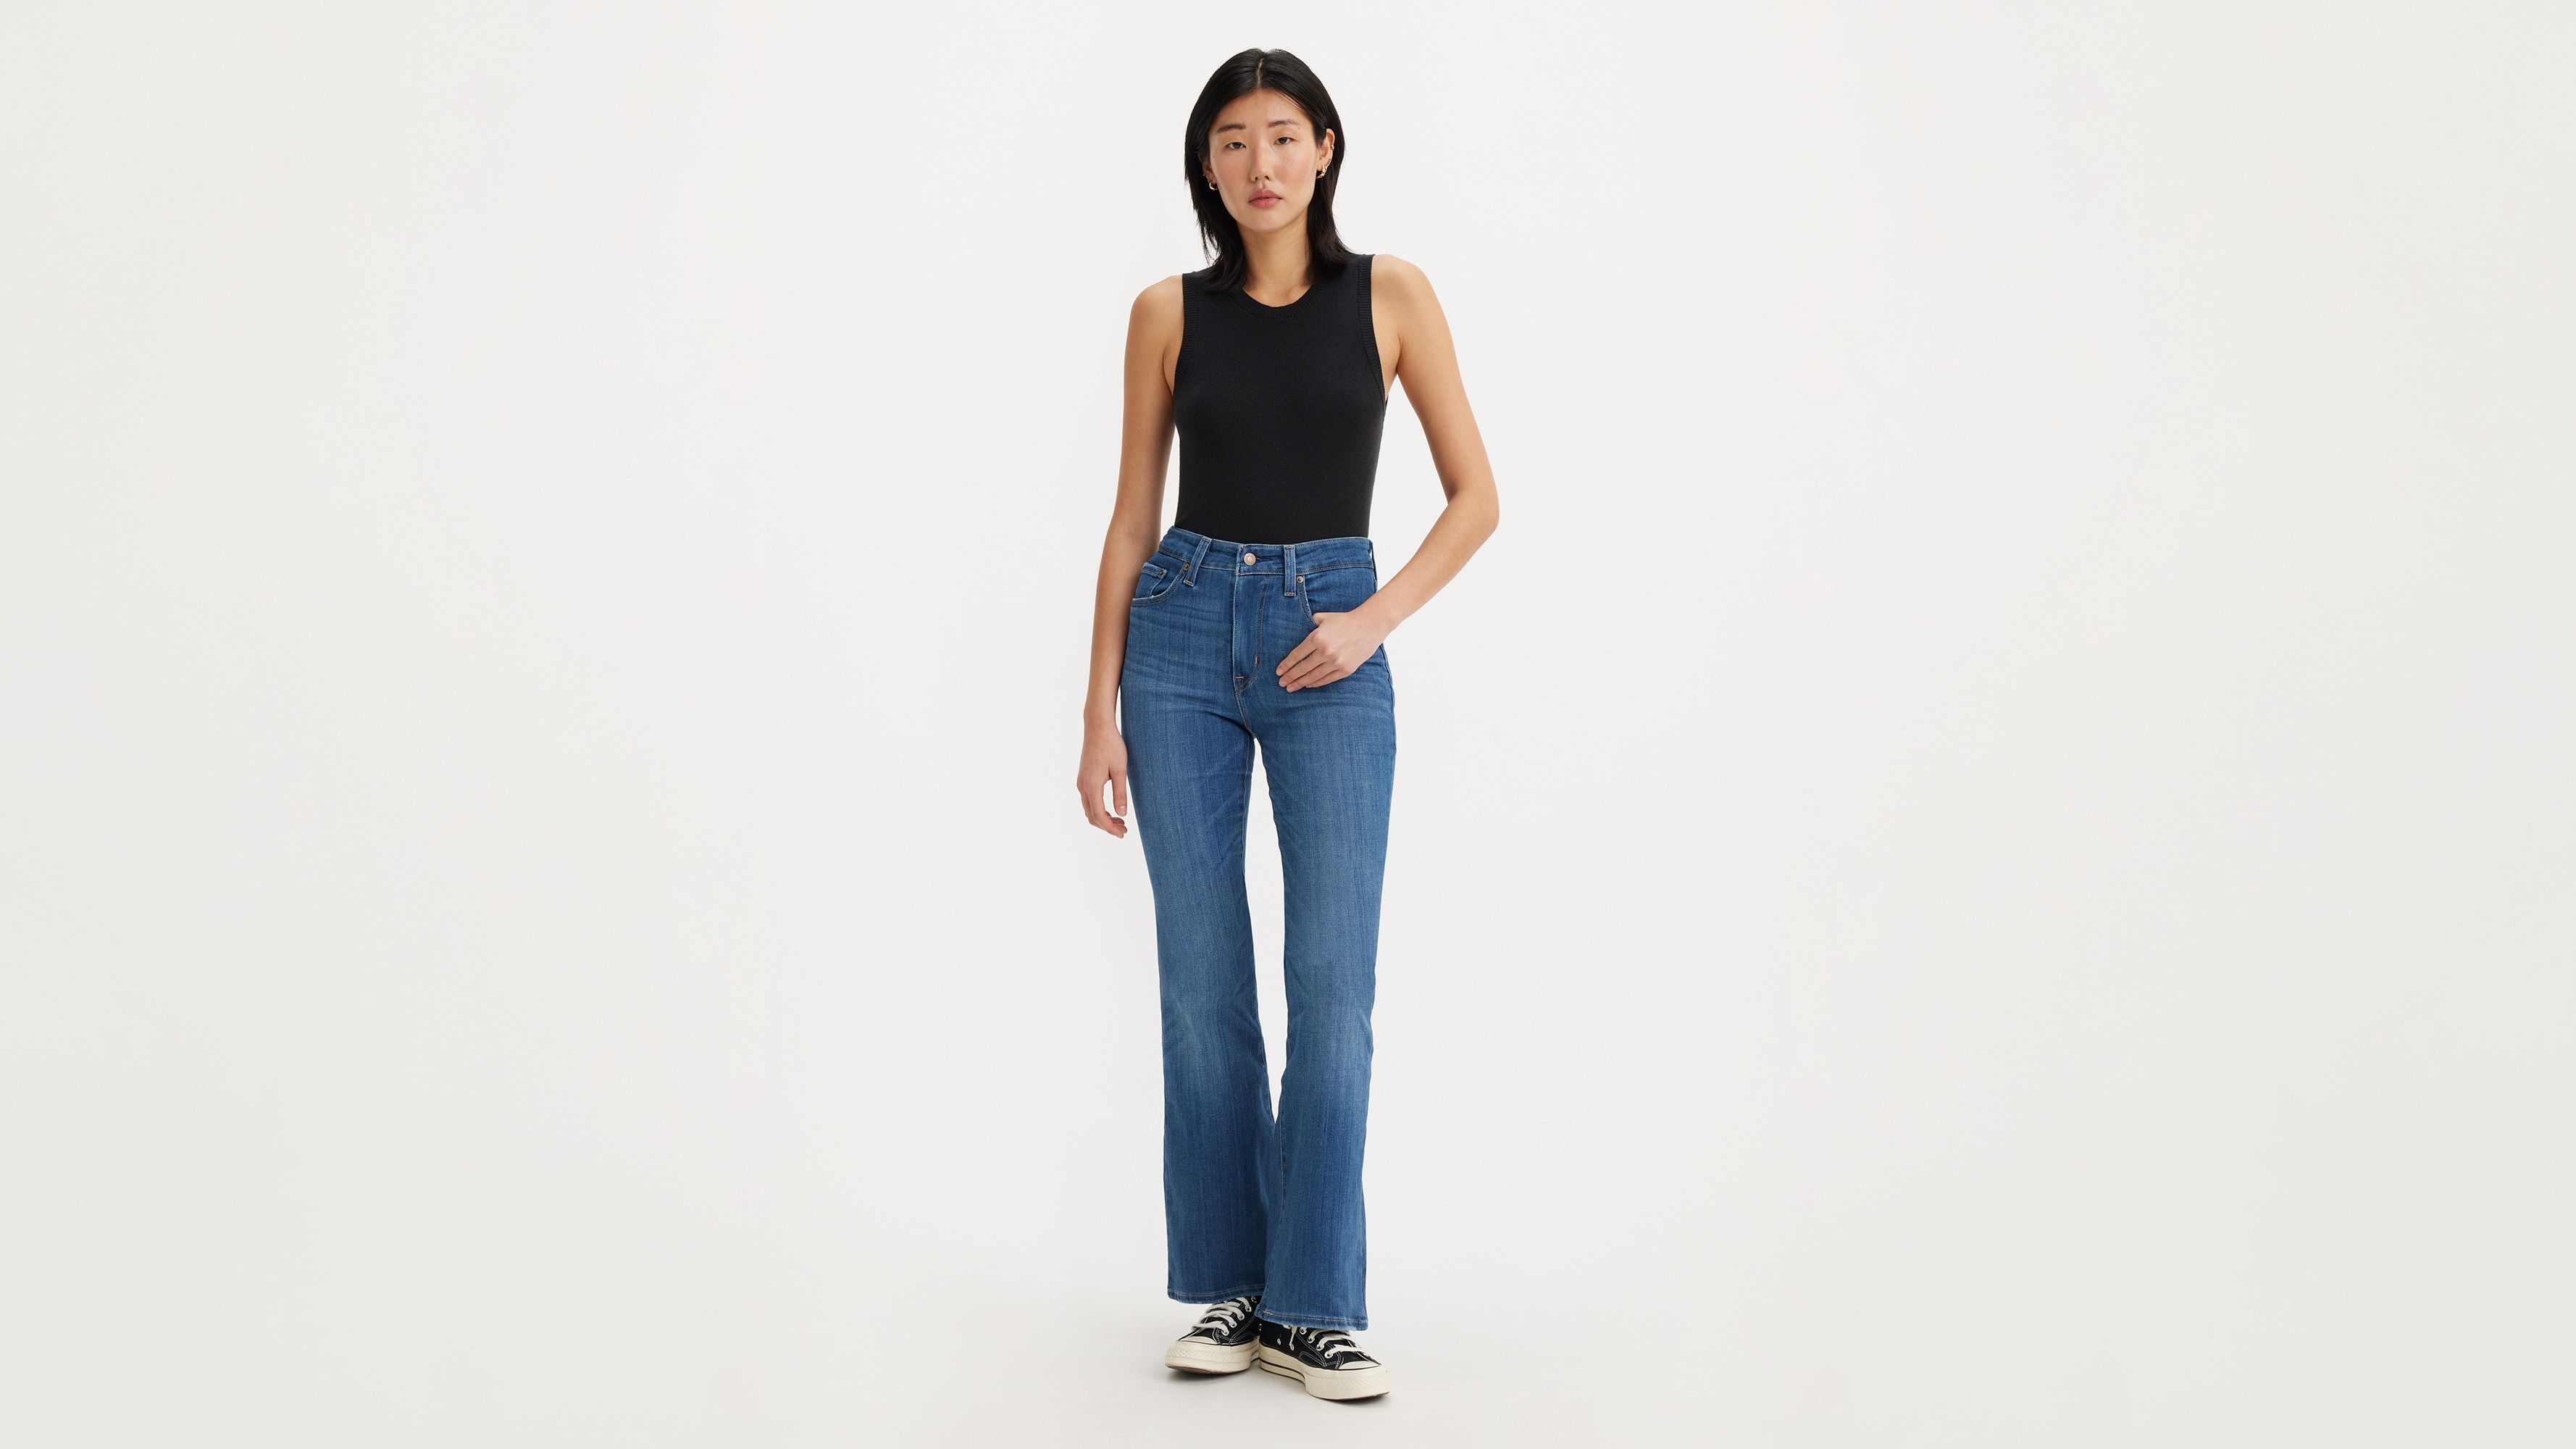 726™ High Rise Flare Jeans (Plus) - Levi's Jeans, Jackets & Clothing